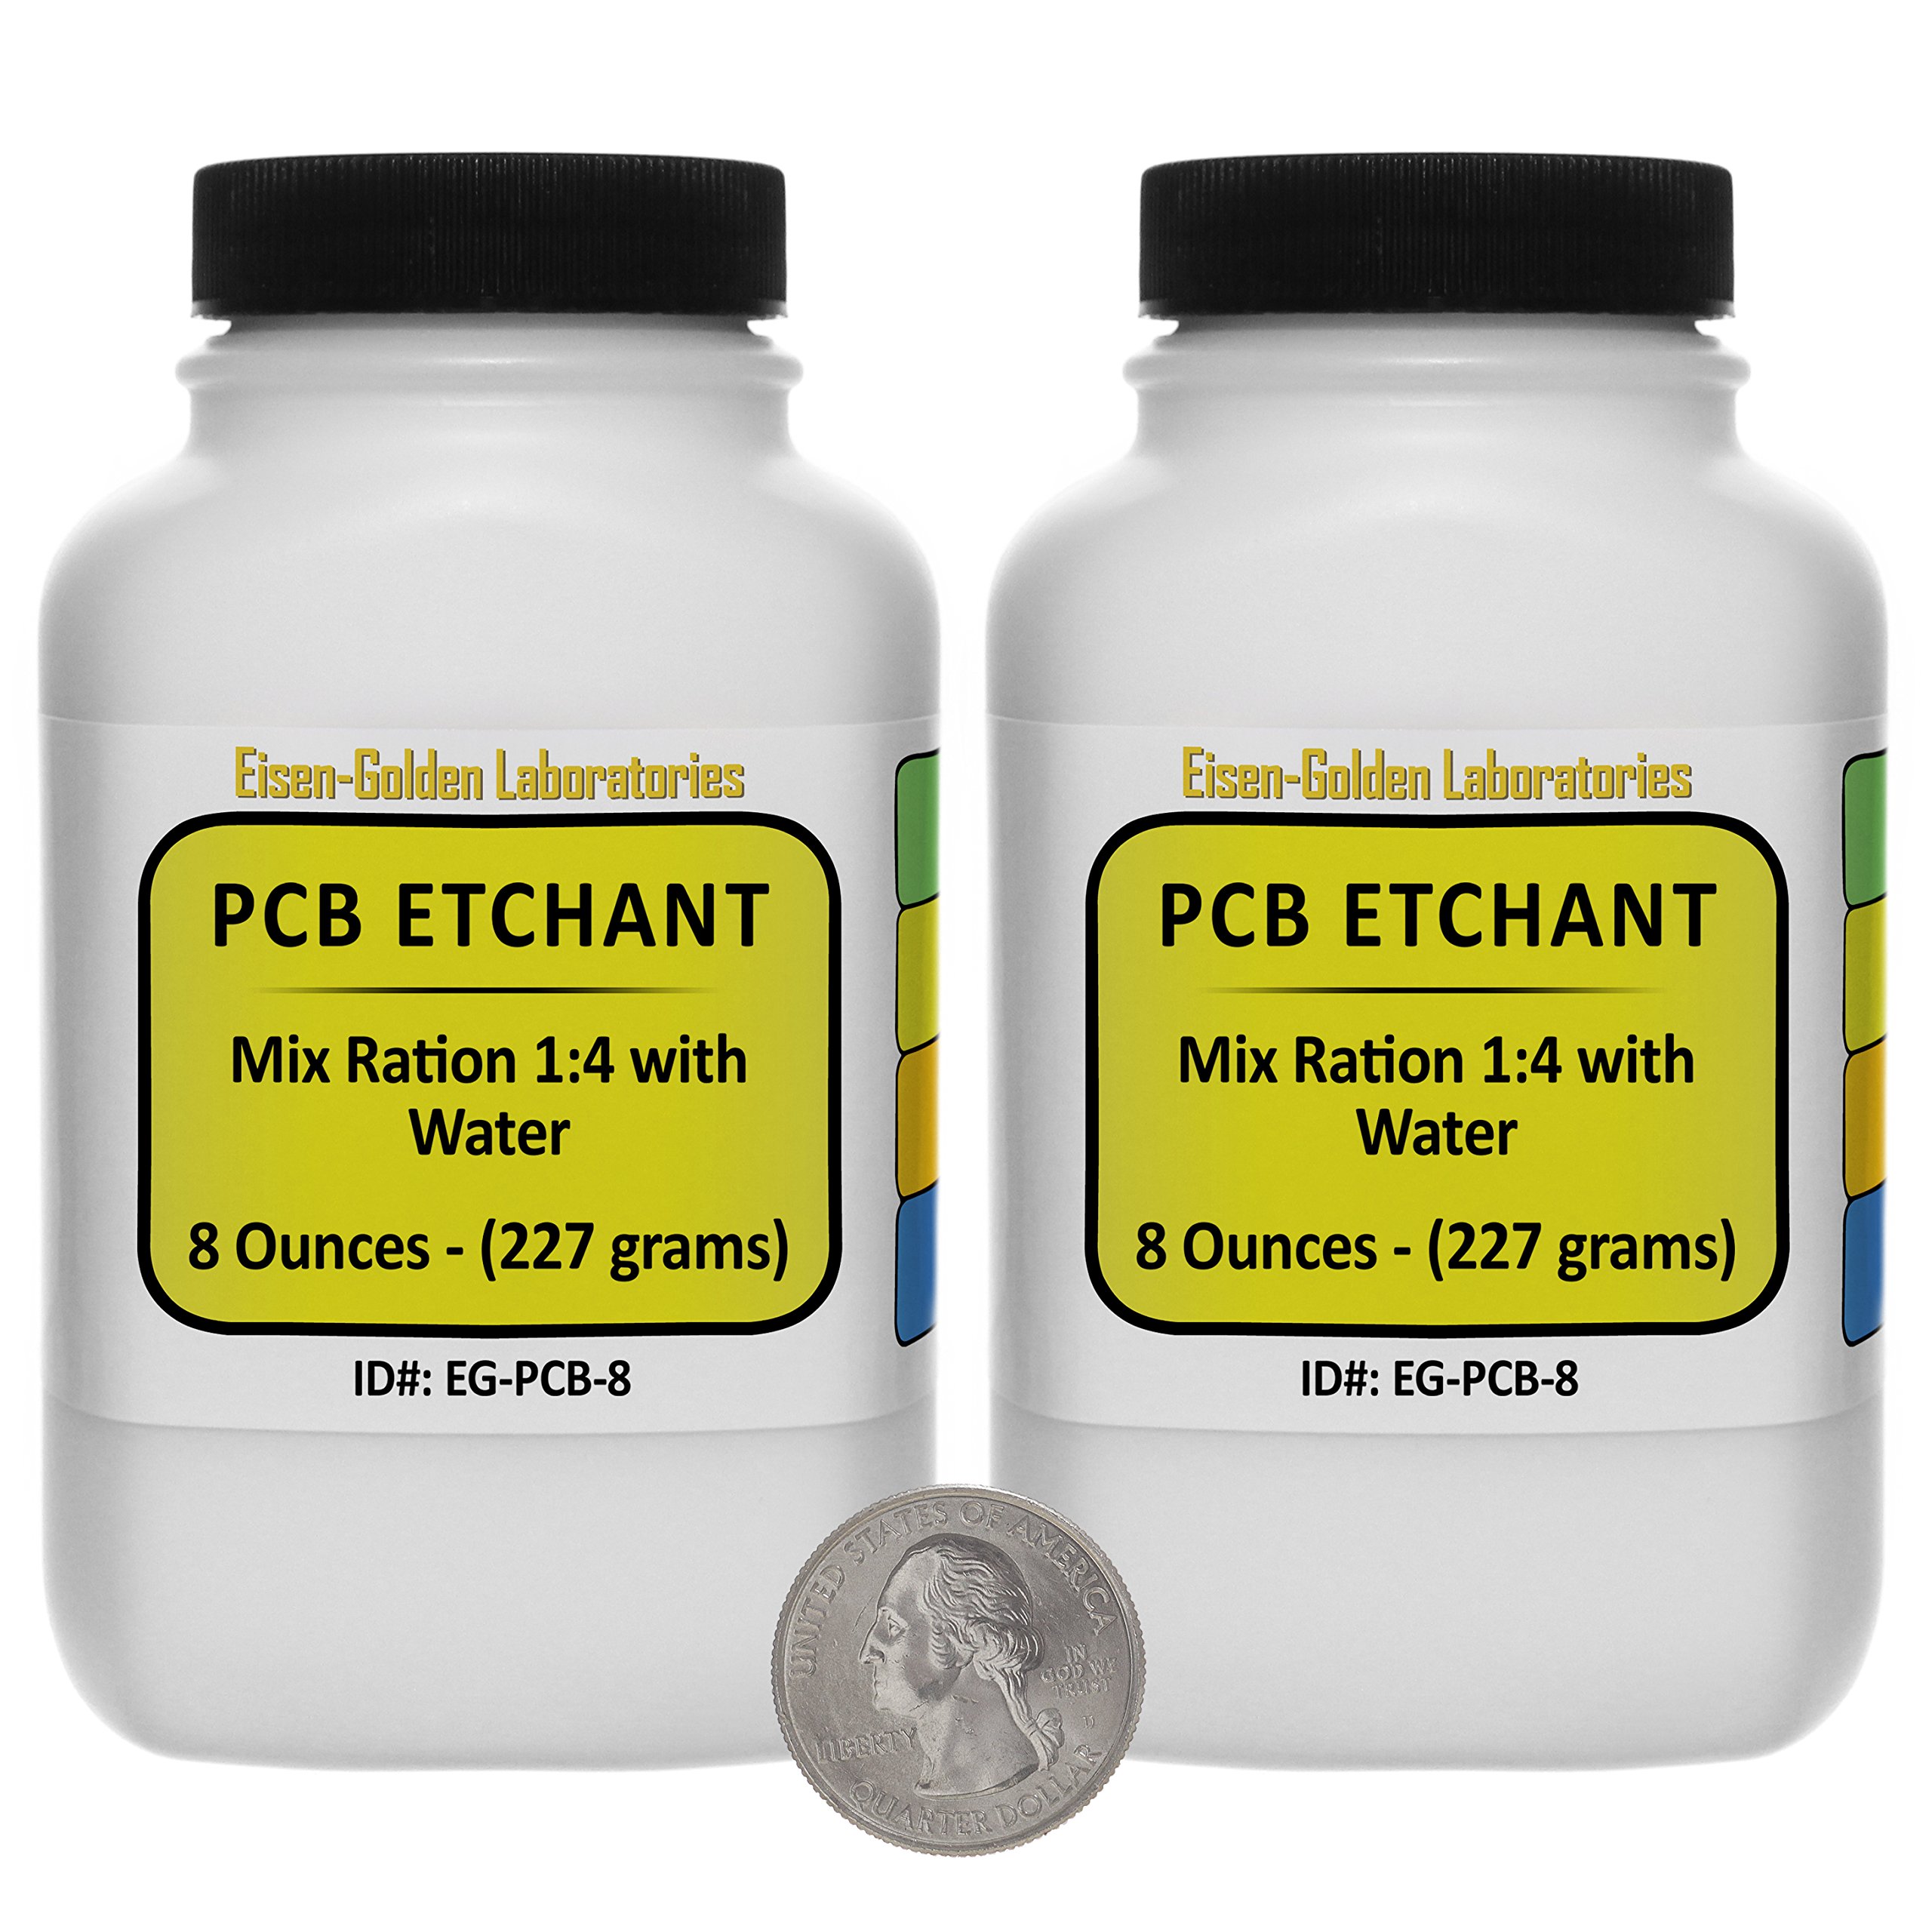 Printed Circuit Board Etchant [PCB] Dry Powder 1 Lb in Two Space-Saver Bottles